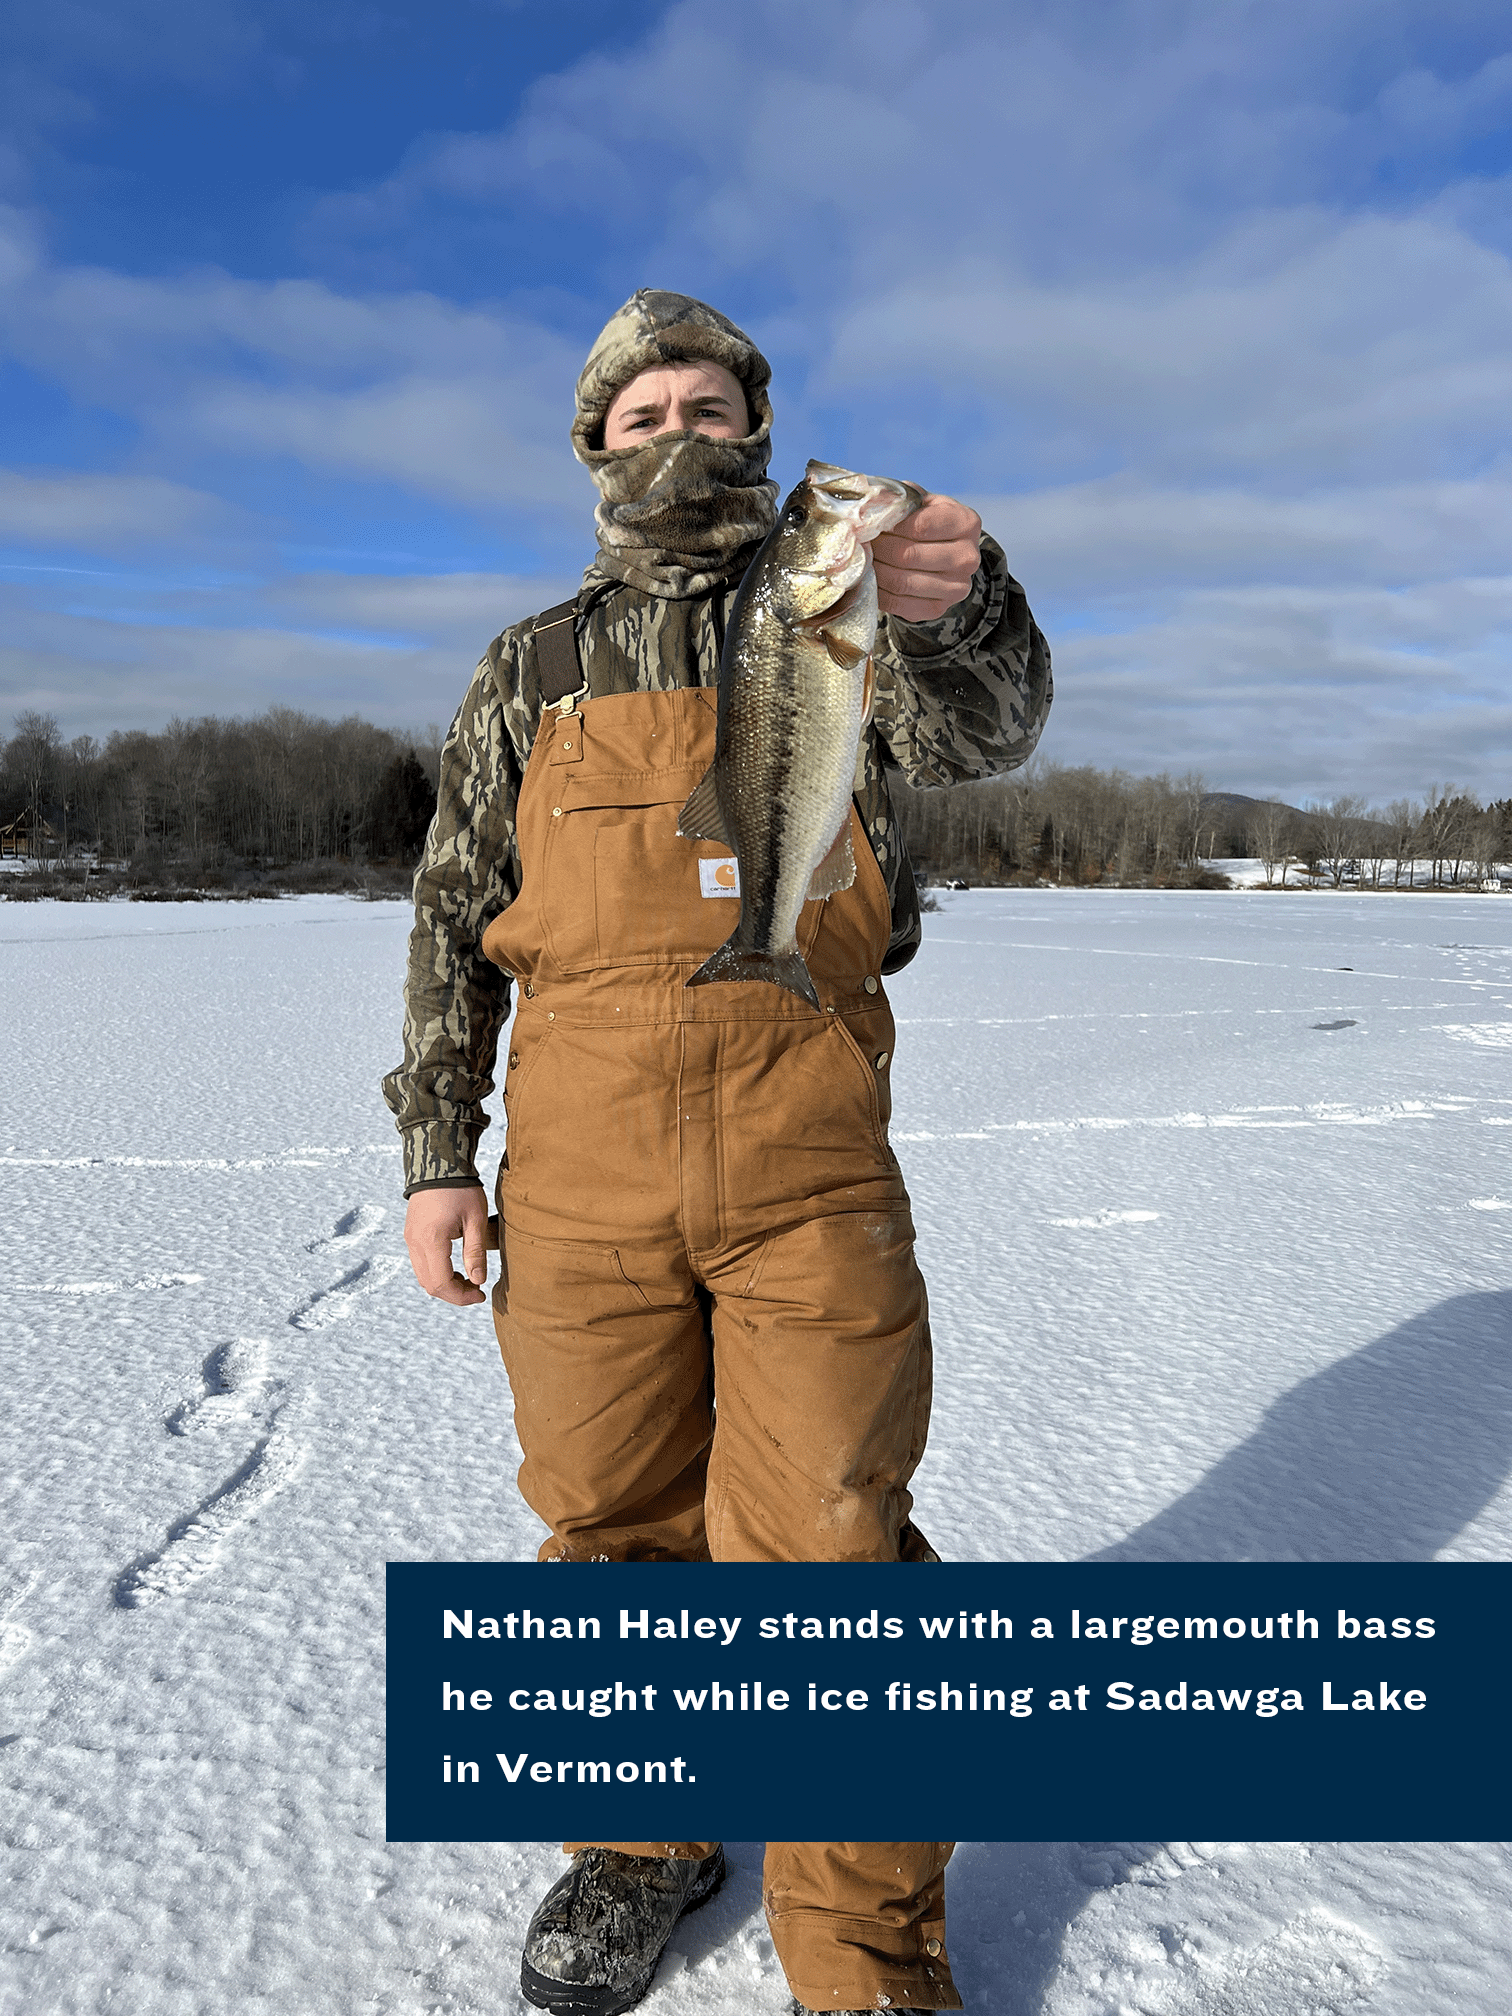 Nathan Haley stands with a largemouth bass he caught while ice fishing at Sadawga Lake in Vermont. 